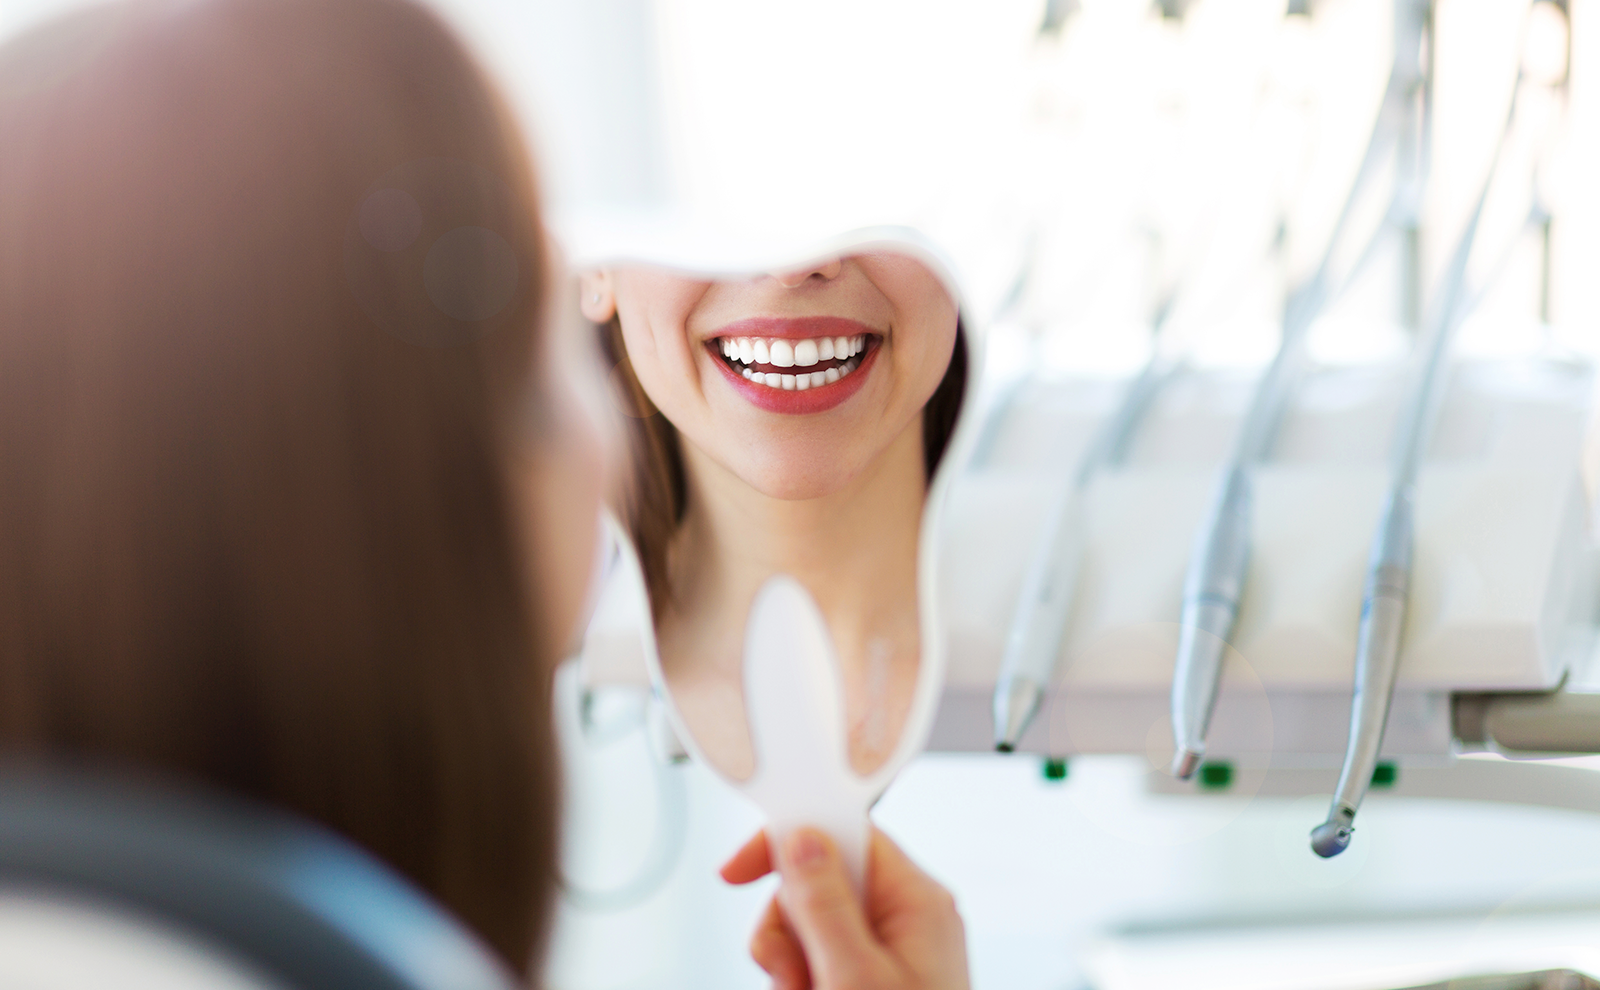 Woman looking in the mirror at her teeth